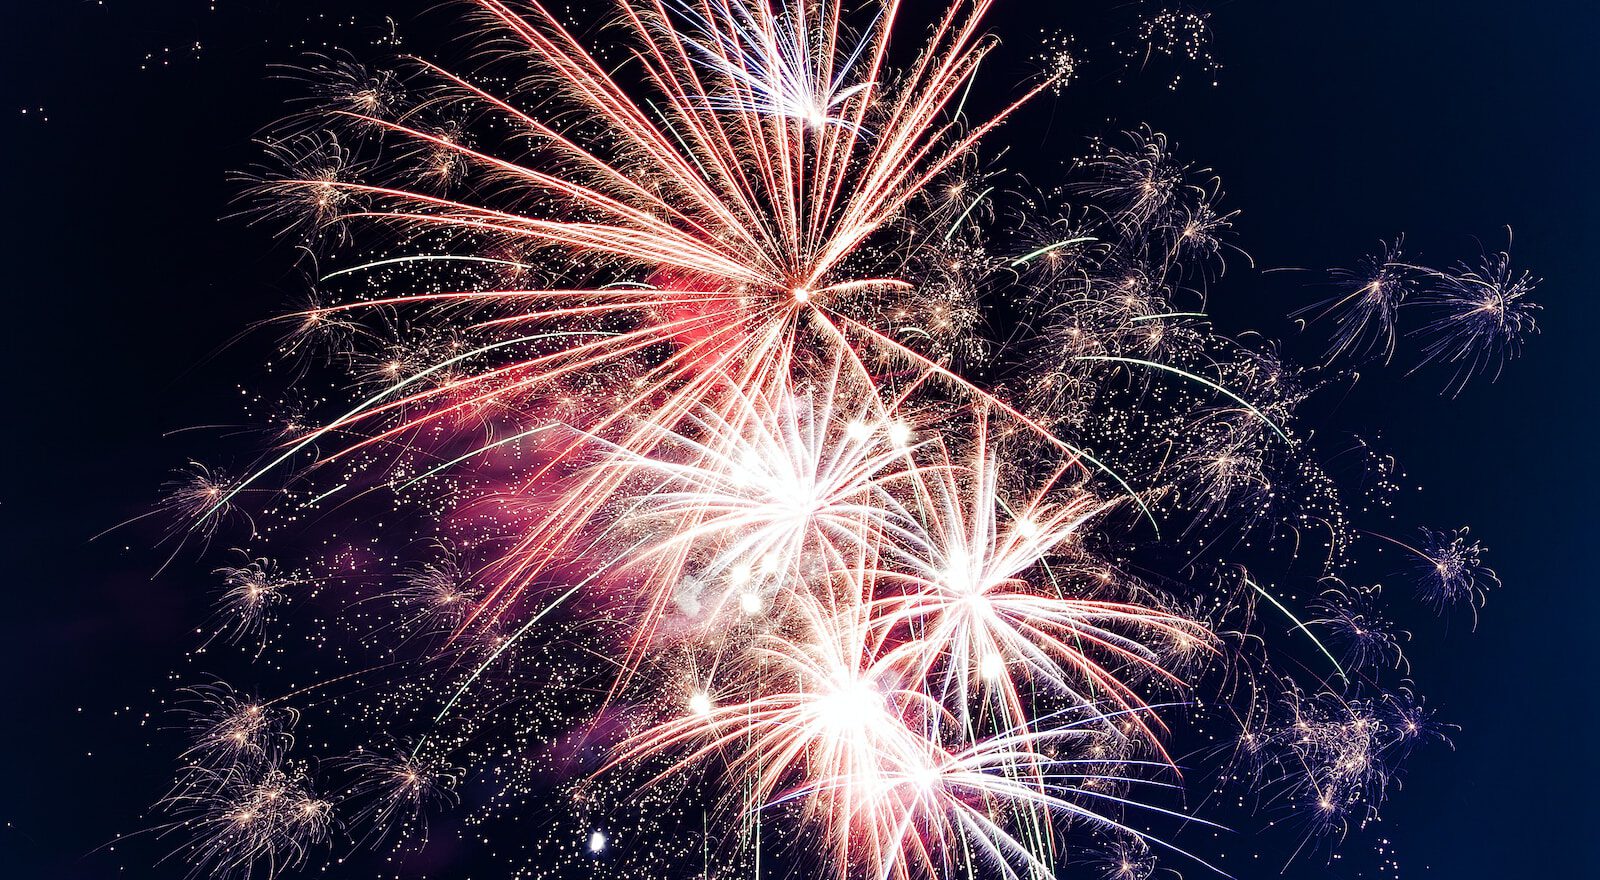 time lapse photography of fireworks at night